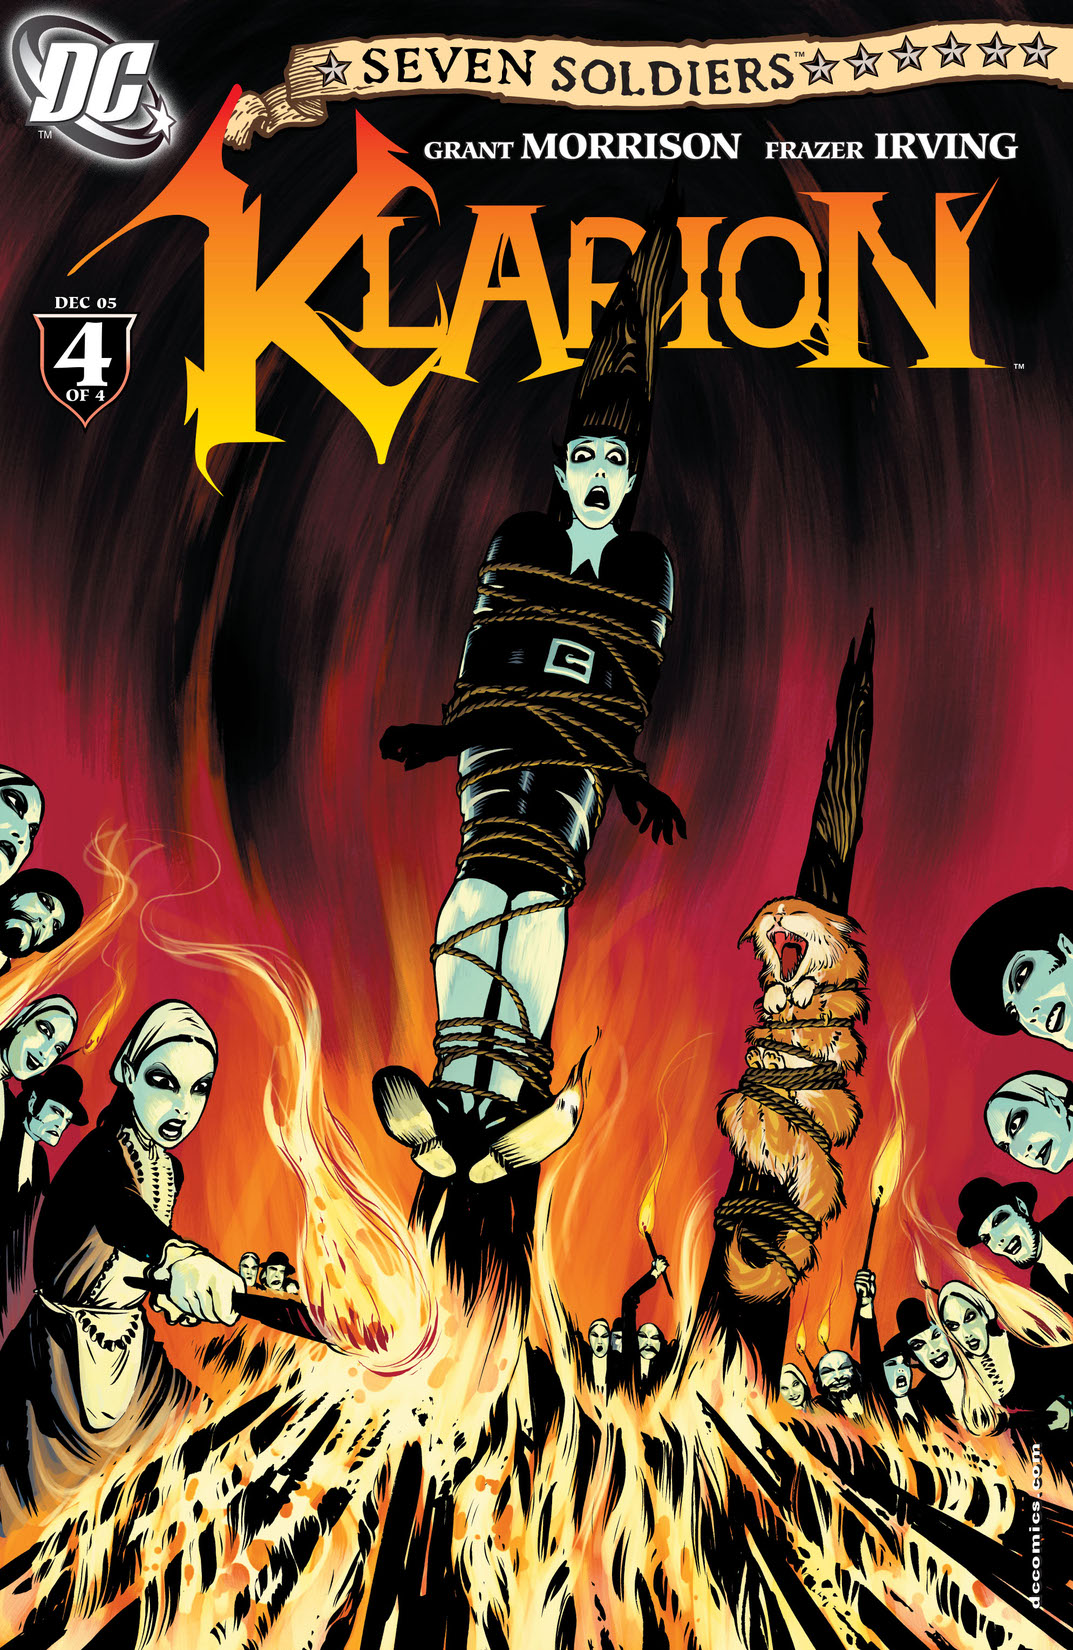 Seven Soldiers: Klarion the Witch Boy #4 preview images